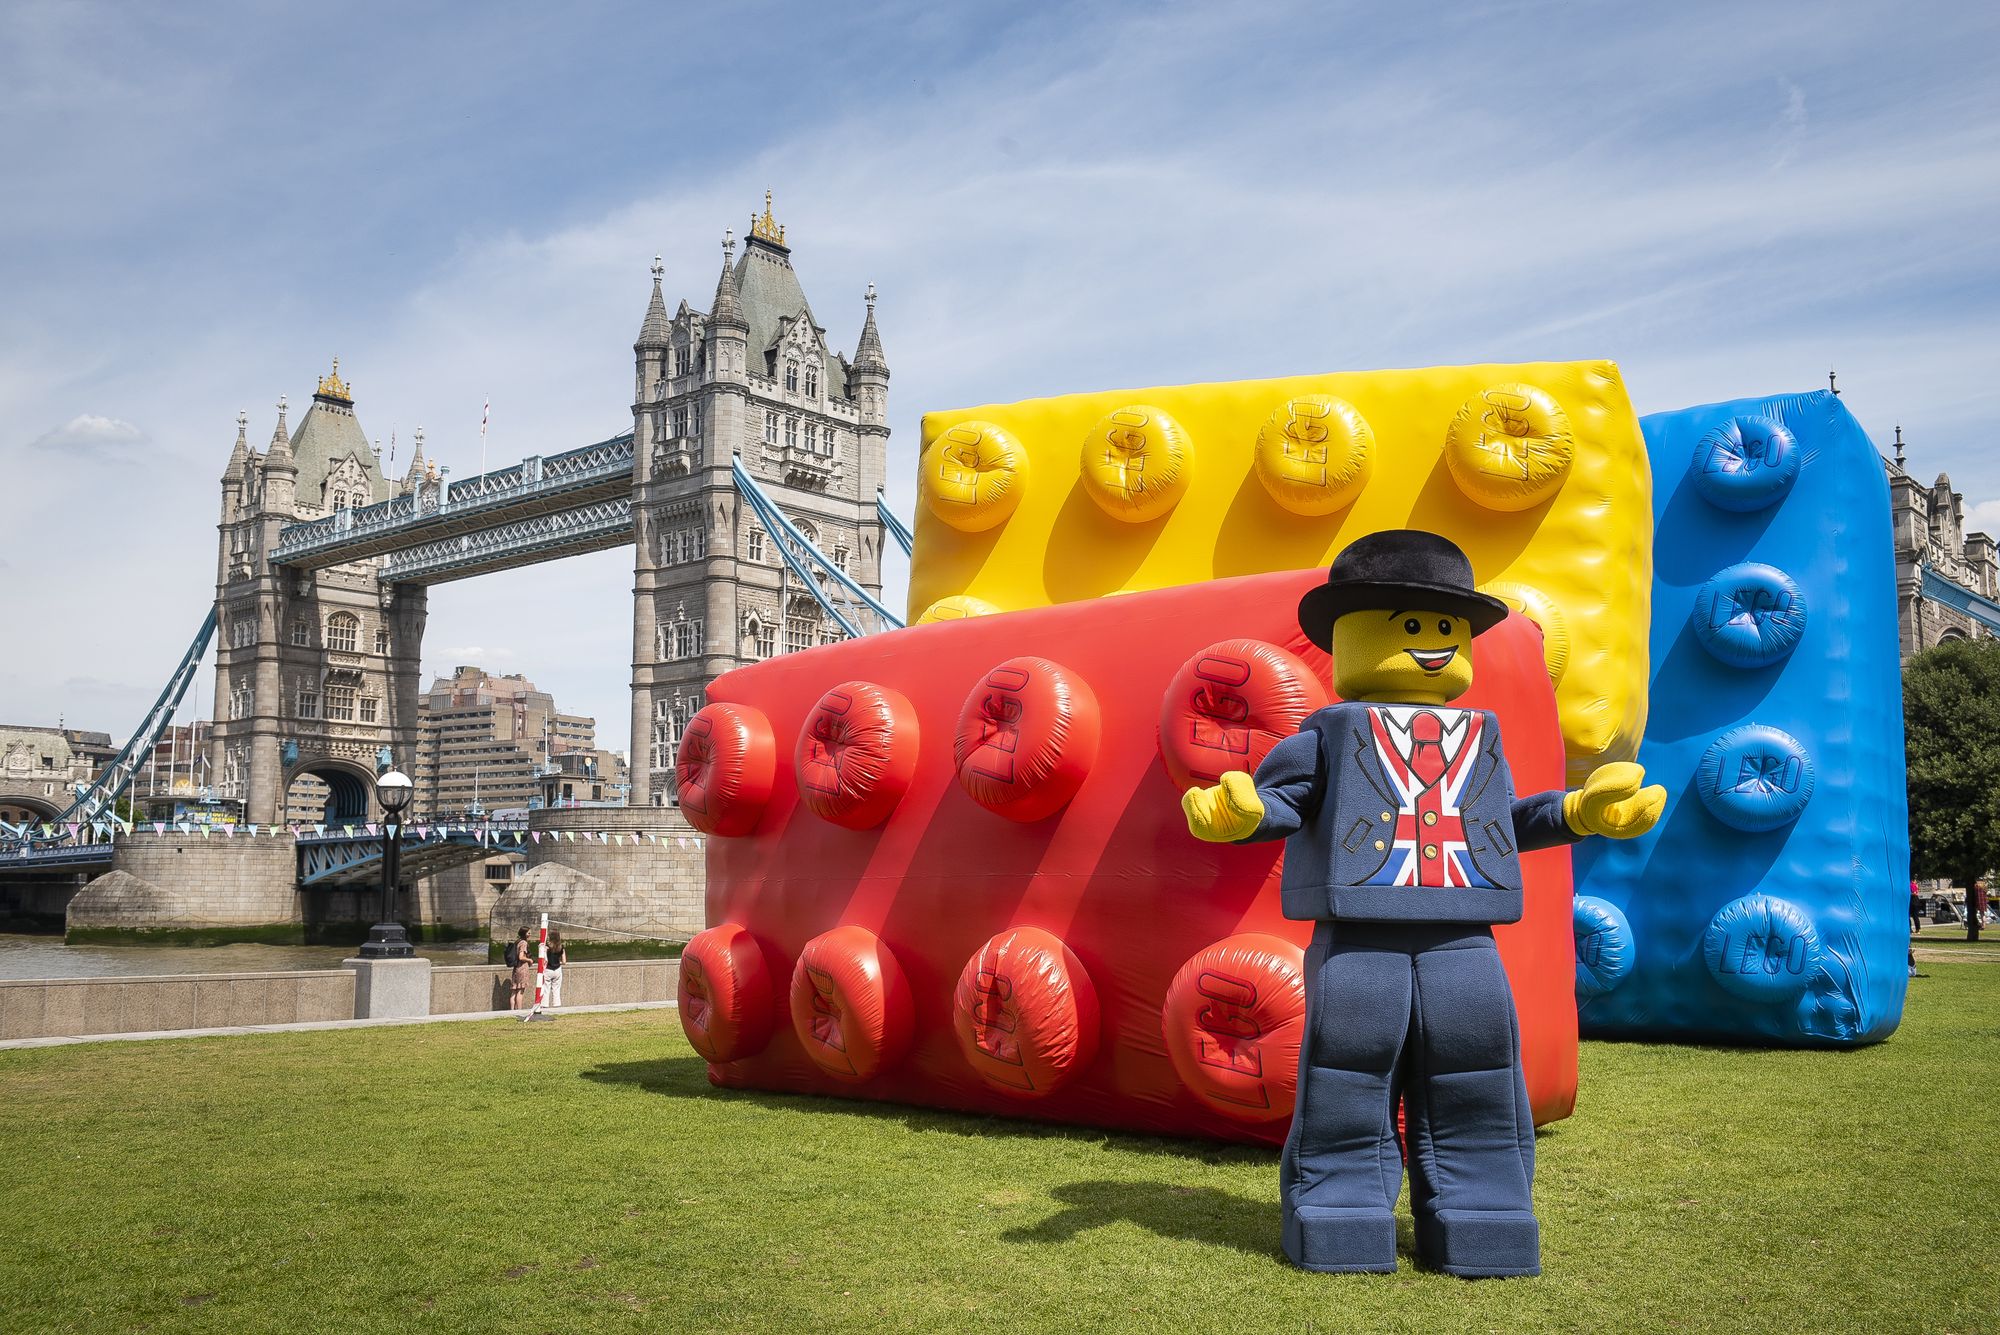 Lego Store London set to be the biggest in the world with new revamp